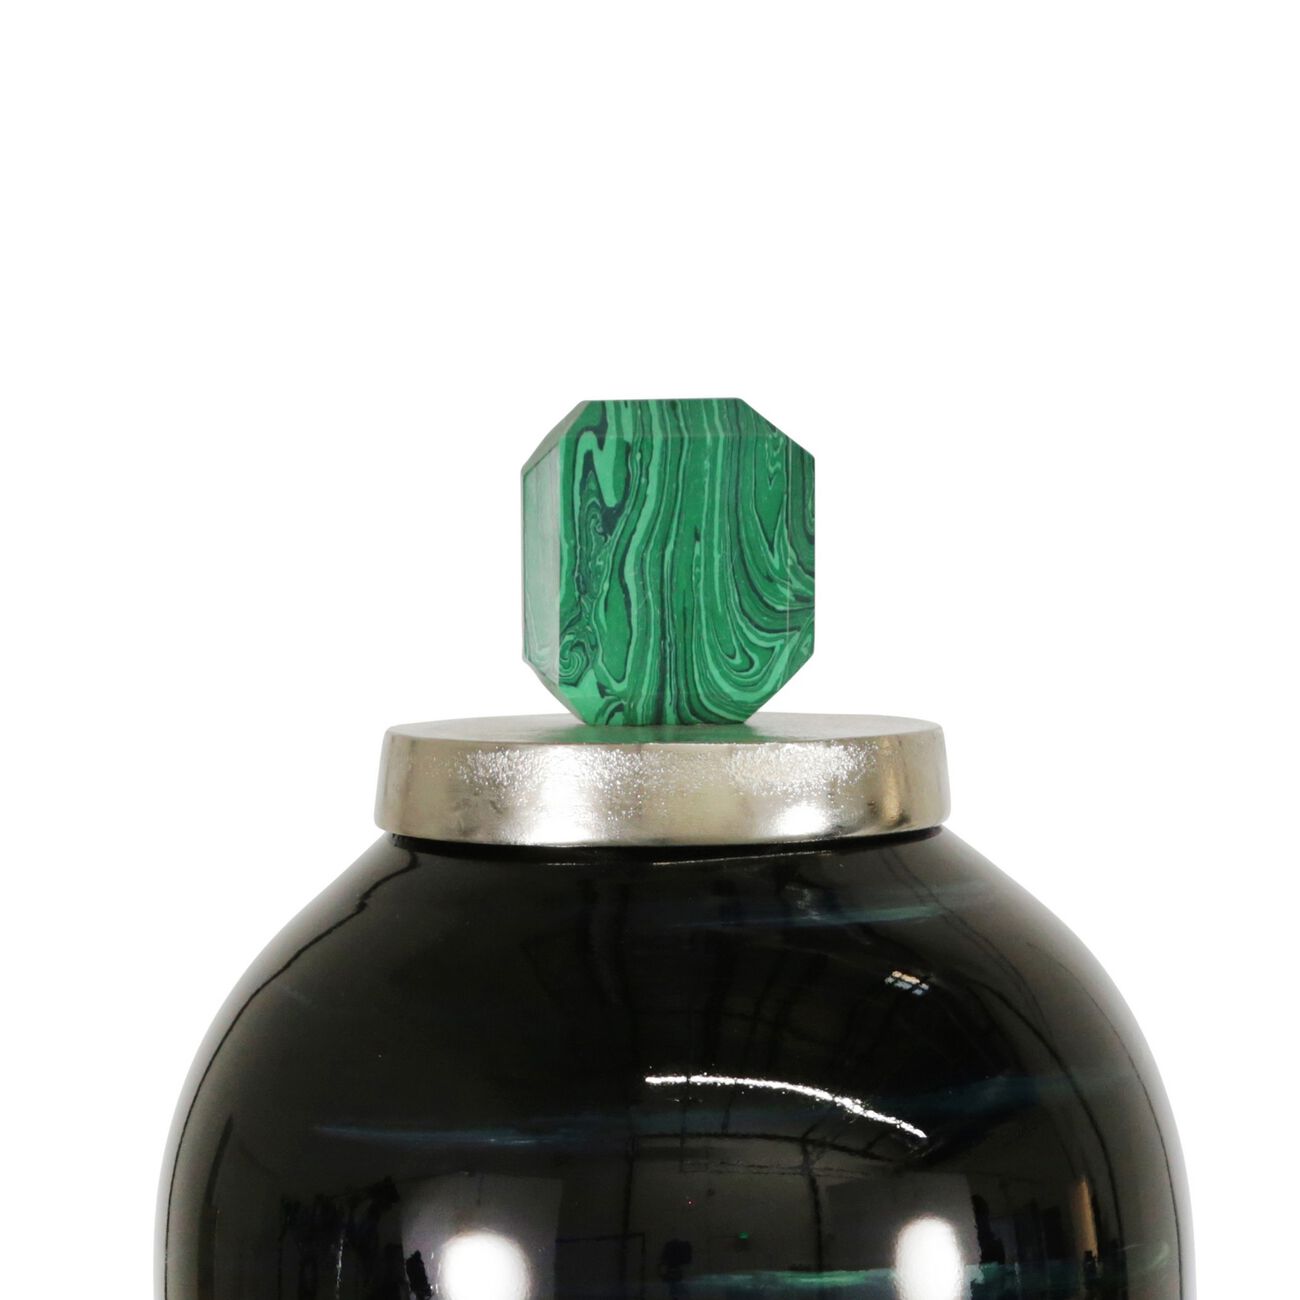 Contemporary Metal Elongated Urn Shaped Jar with Lid, Black and Green